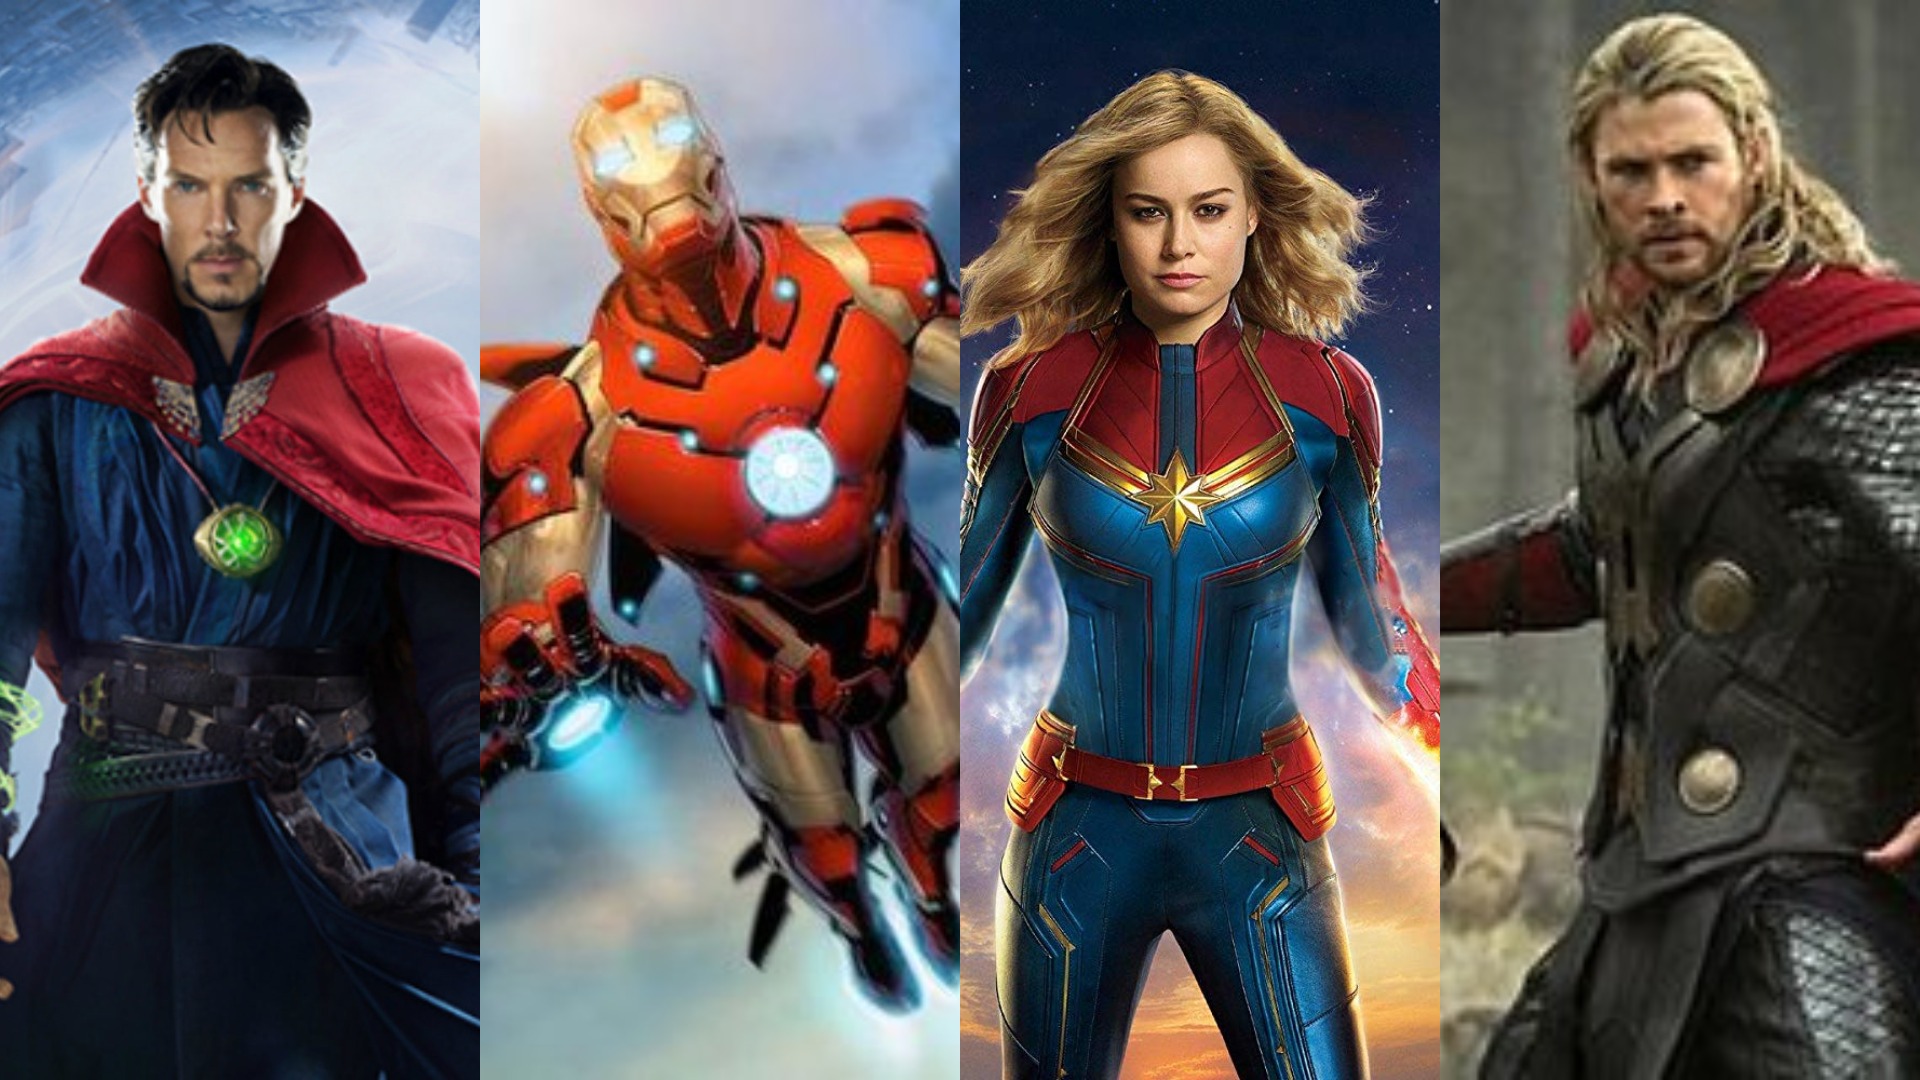 Only a Real Marvel Fan Can Match These Characters With Their Superpowers pjimage 24